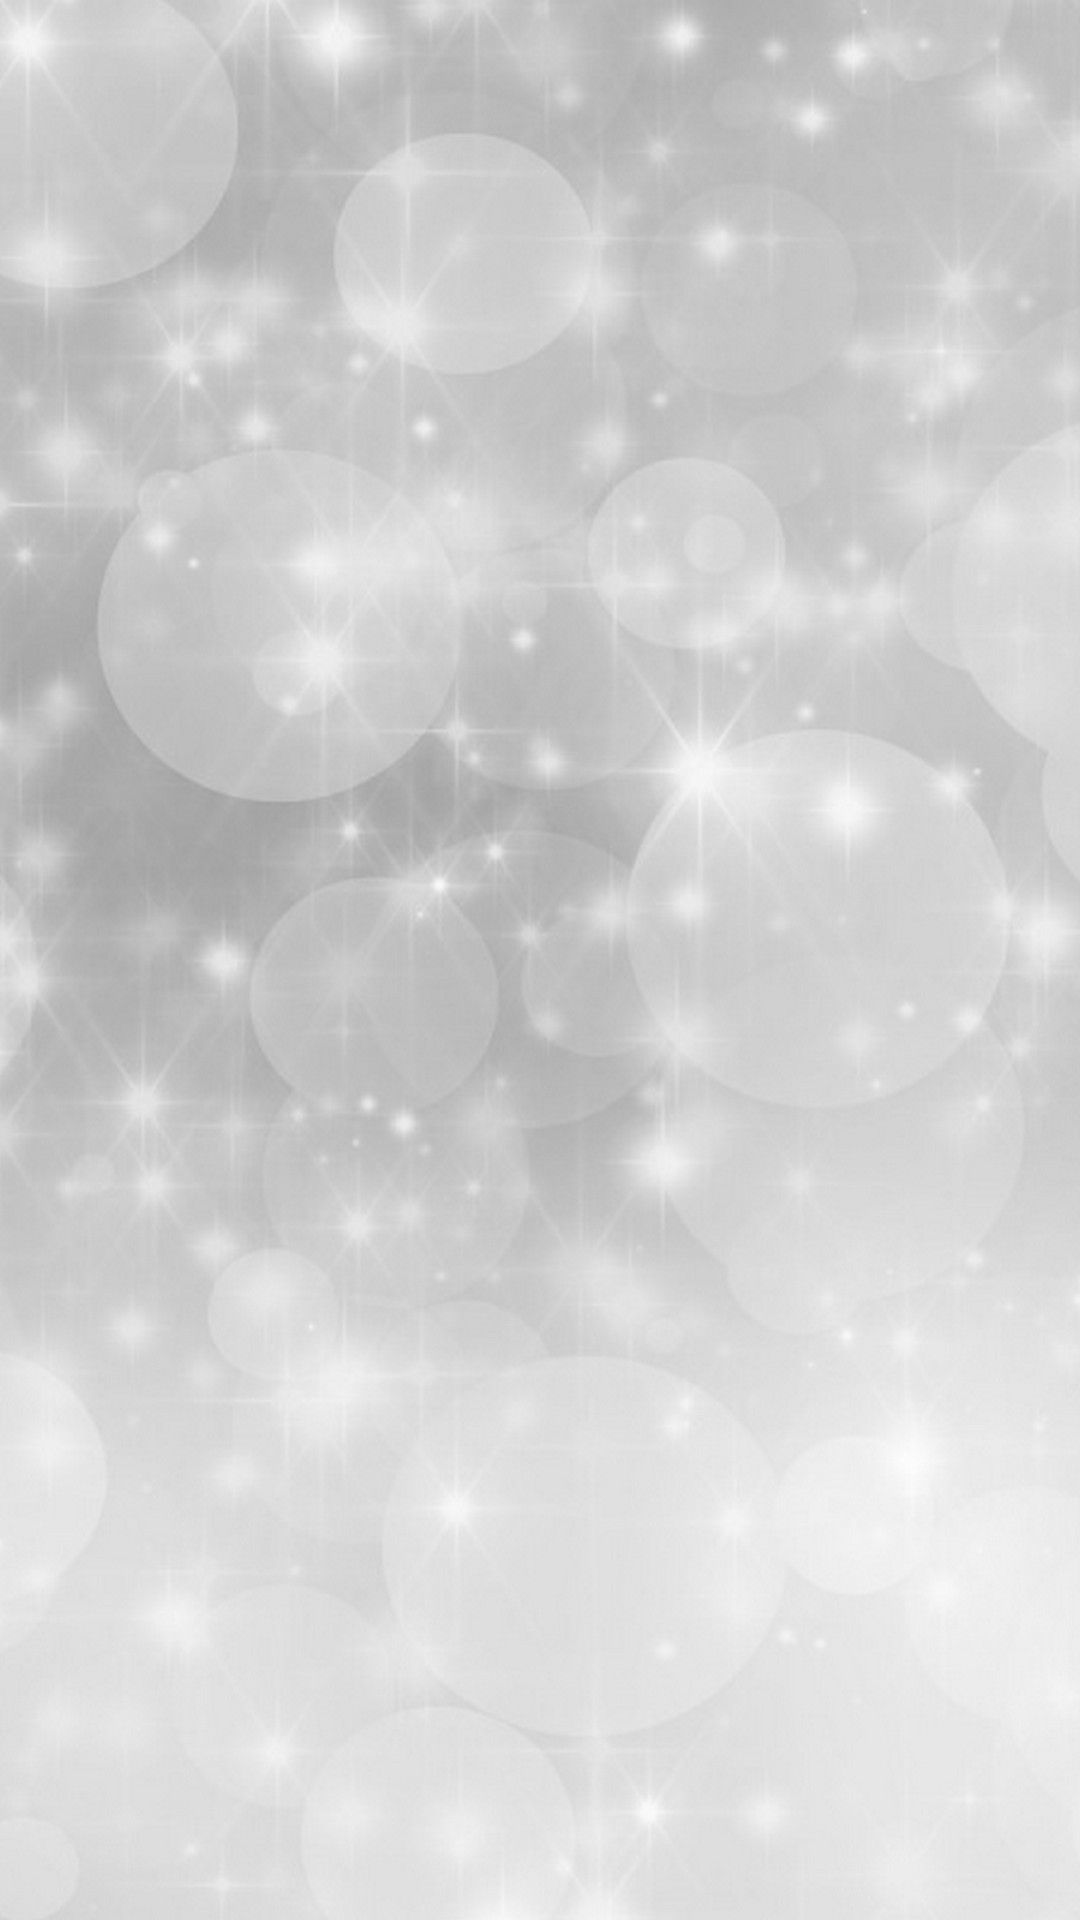 A silver background with white circles - Silver